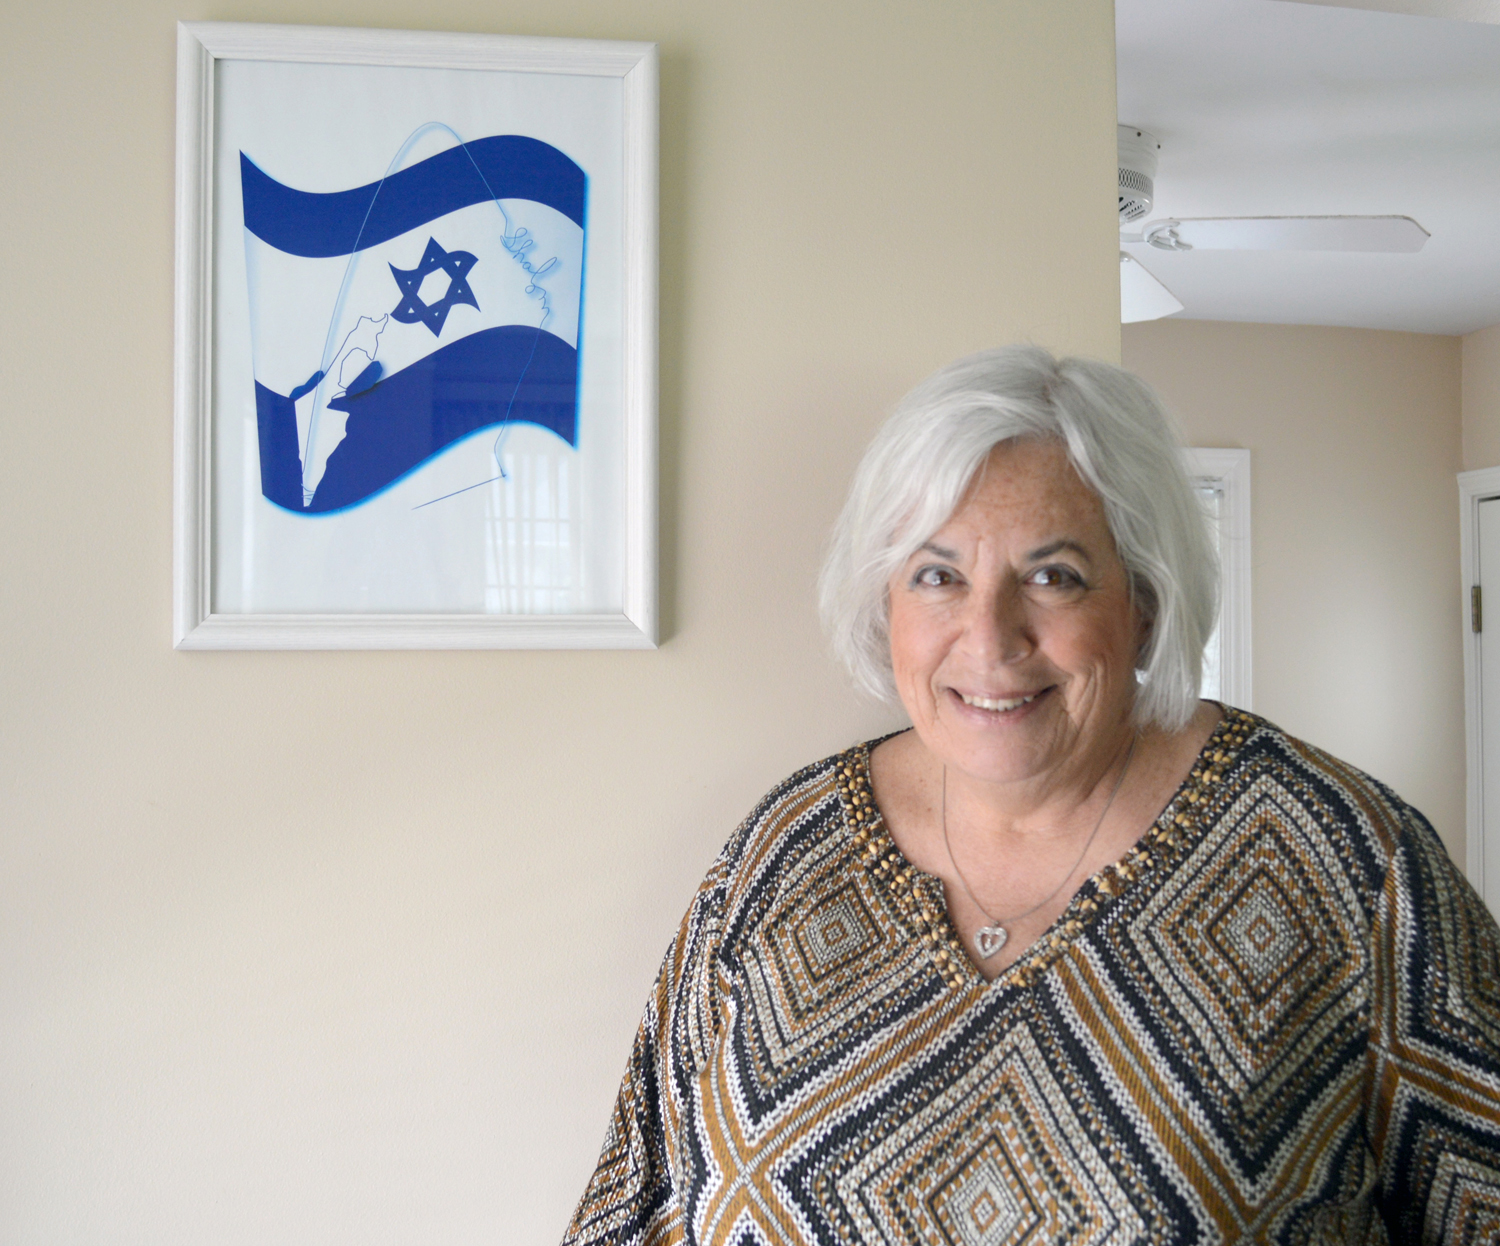 Susan Kellner, pictured in her Shaker Heights home, sued her employer, the federal government, for anti-Semitic discrimination.